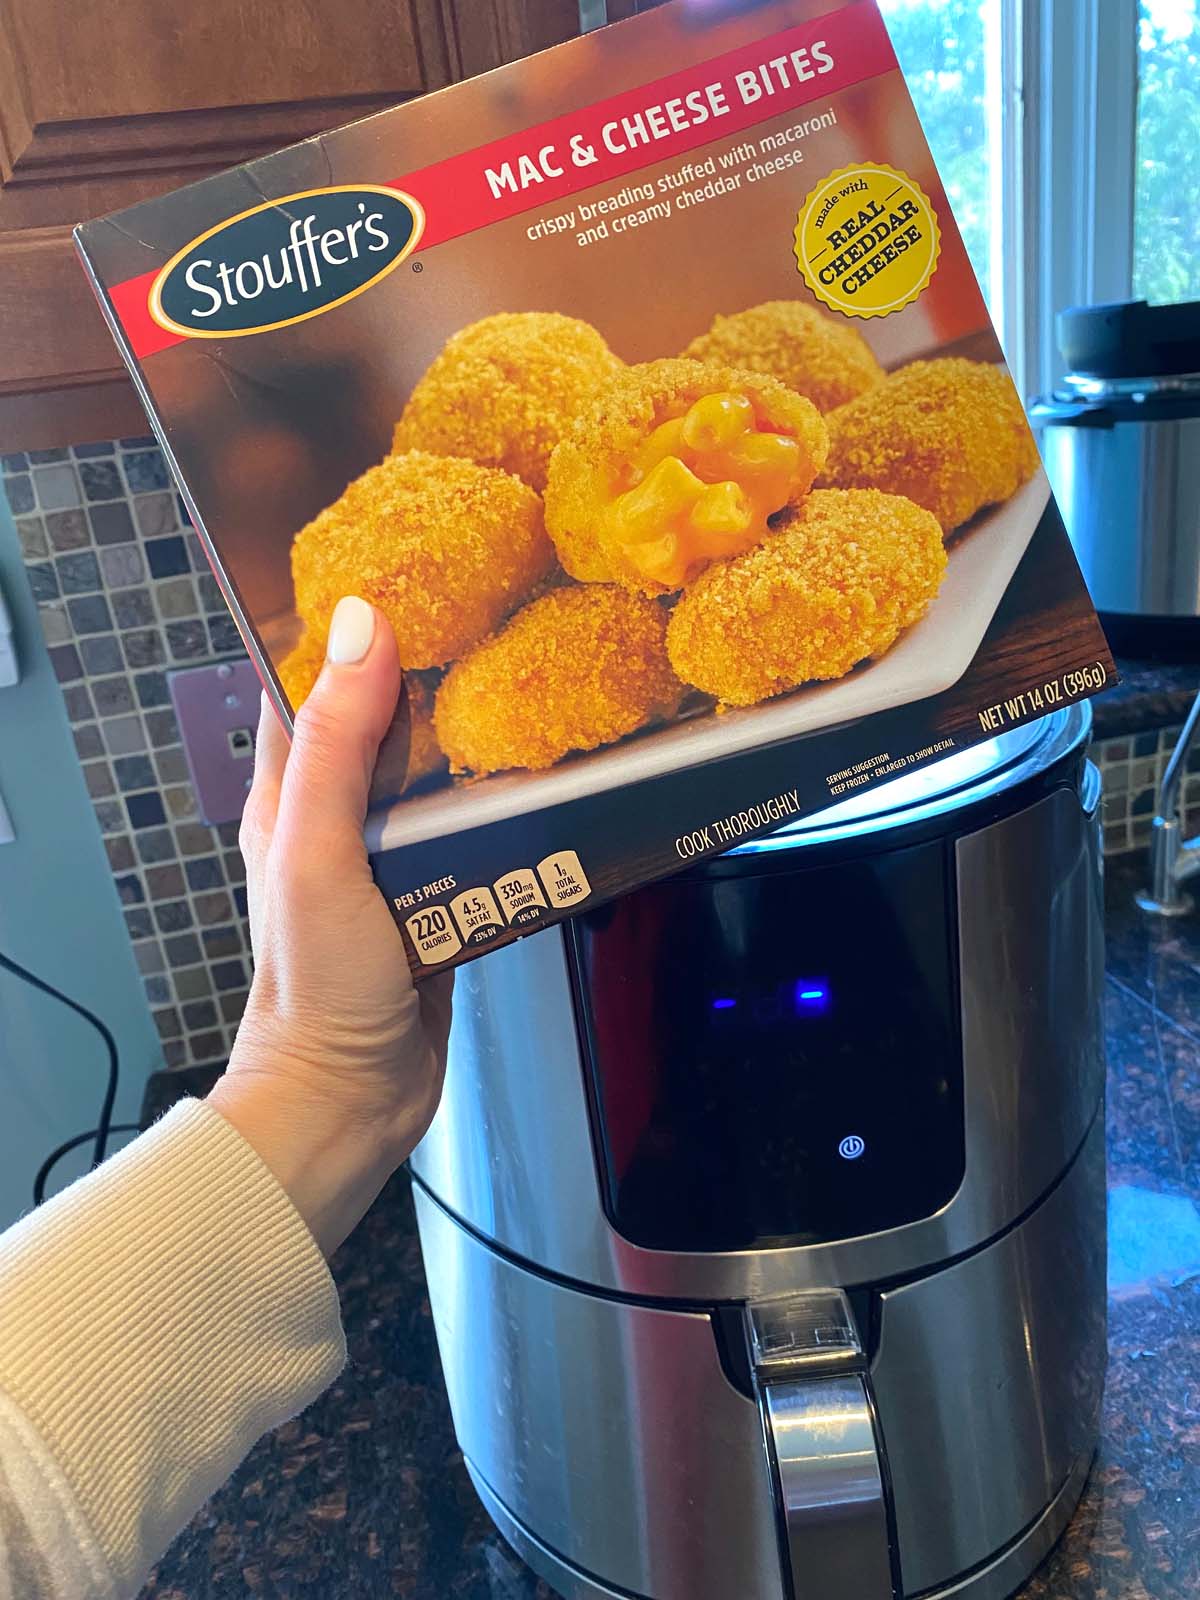 A box of mac and cheese bites being held up in front of an air fryer.